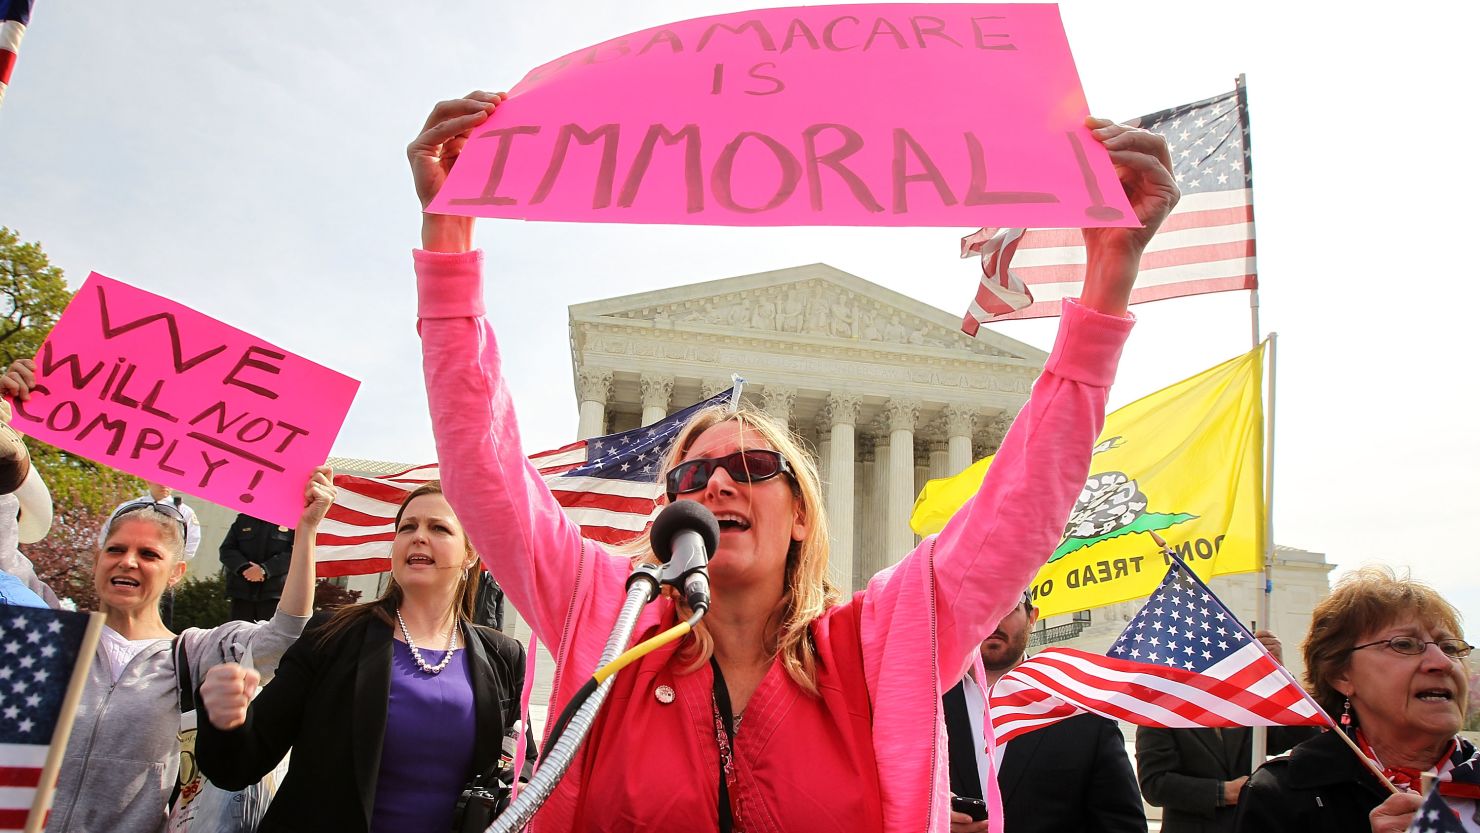 The Supreme Court is expected to rule on the constitutionality of the health care reform law this month.